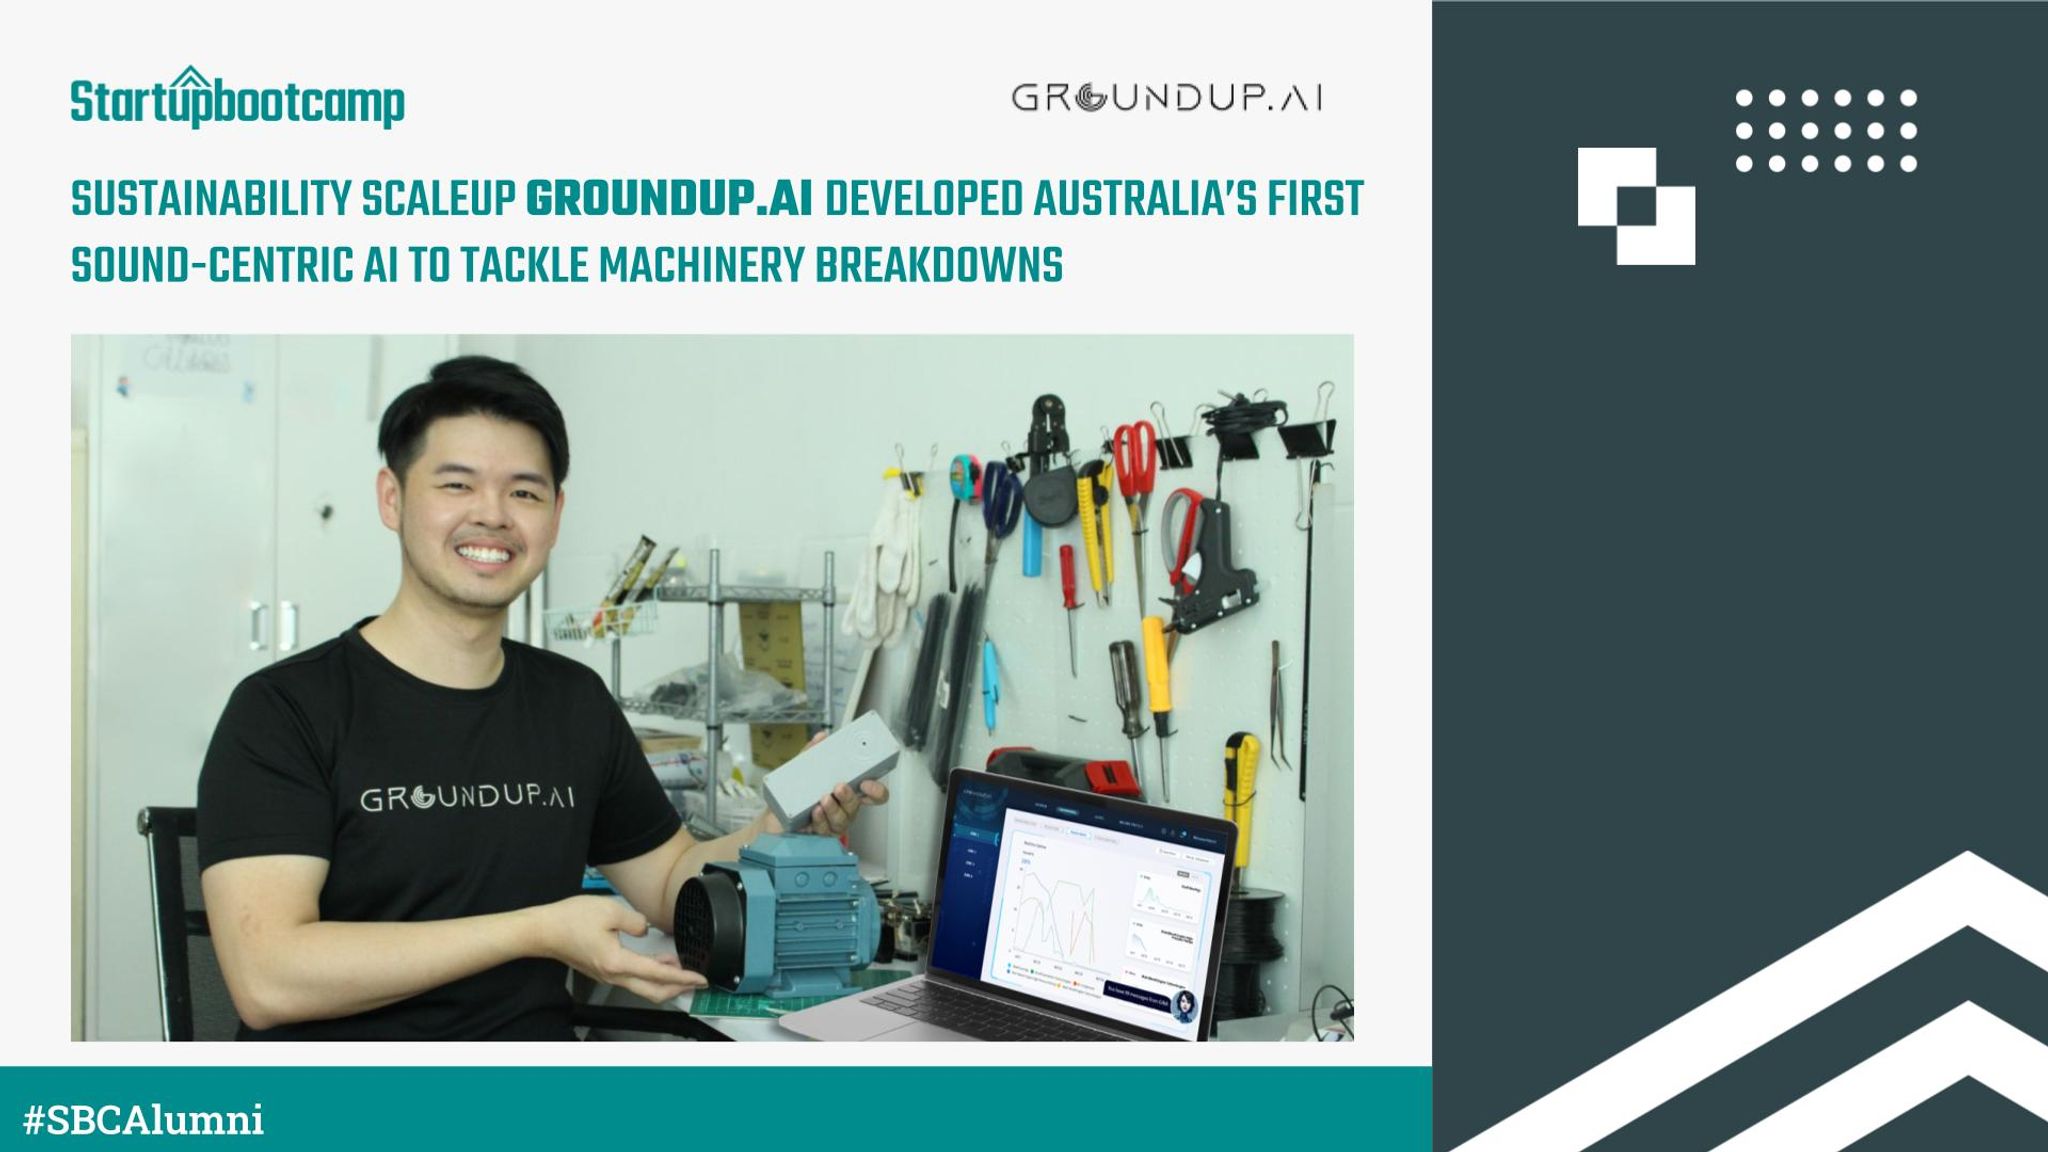 #StartupToScaleUpStories: Maintaining Machine Health and Increasing Workplace Safety with Groundup.ai